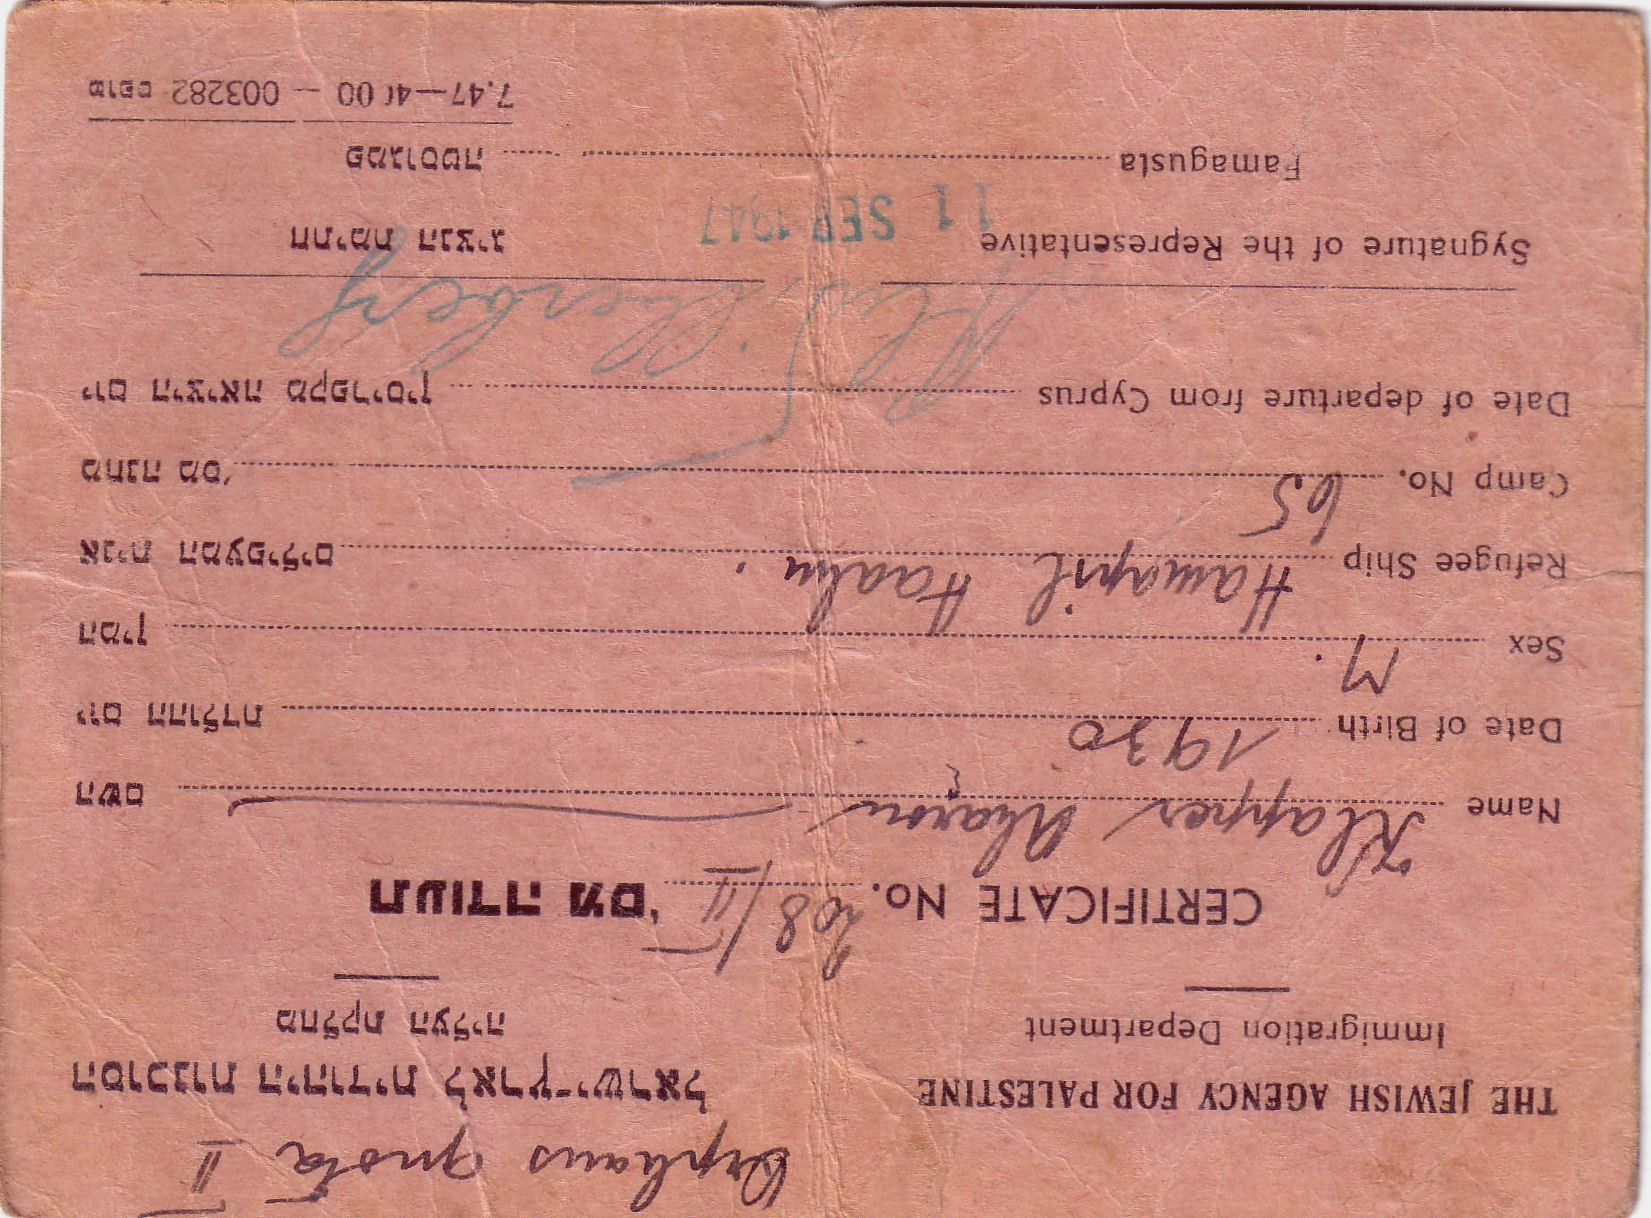 Aharon's new immigrant certificate from the Jewish Agency.